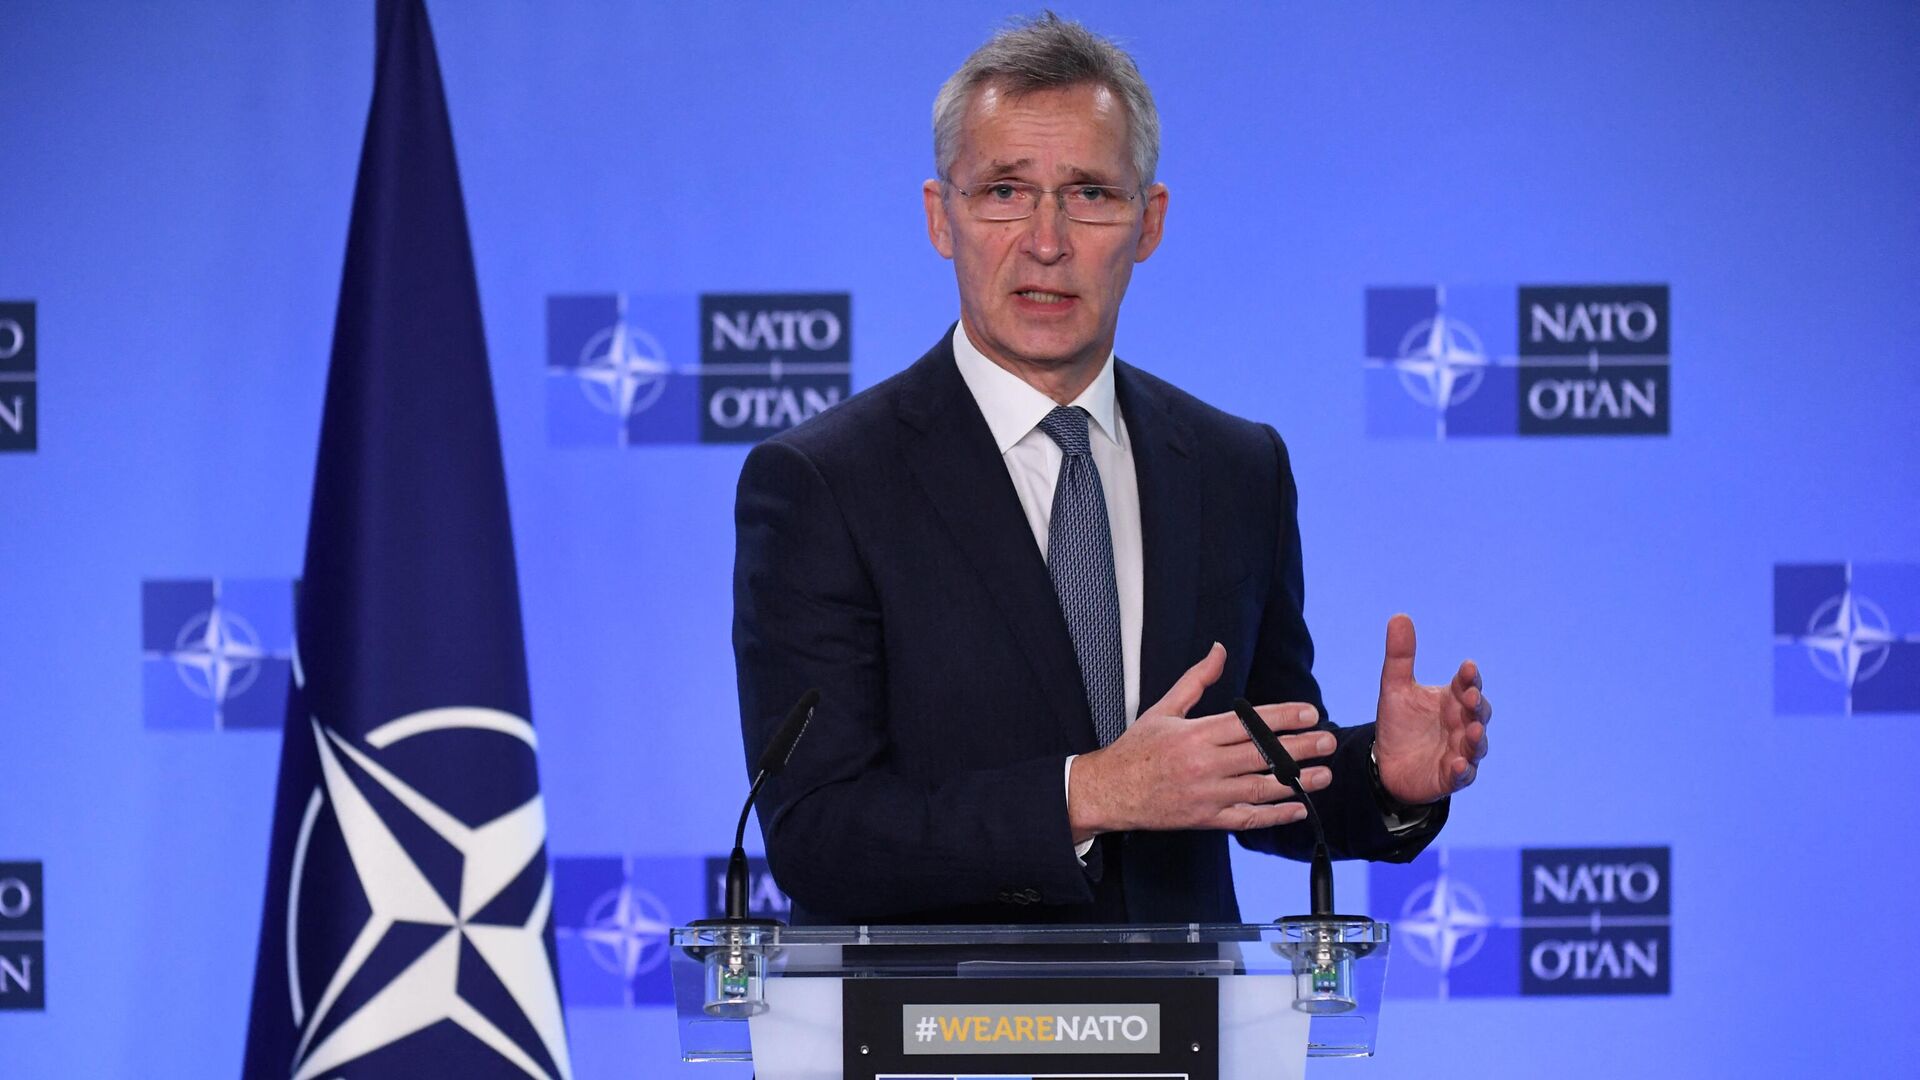 NATO Secretary General Jens Stoltenberg gestures as he speaks during a joint press conference with Ukraine's Deputy Prime Minister for European and Euro-Atlantic Integration after their bilateral meeting at the NATO headquarters in Brussels on January 10, 2022.  - Sputnik International, 1920, 15.03.2022